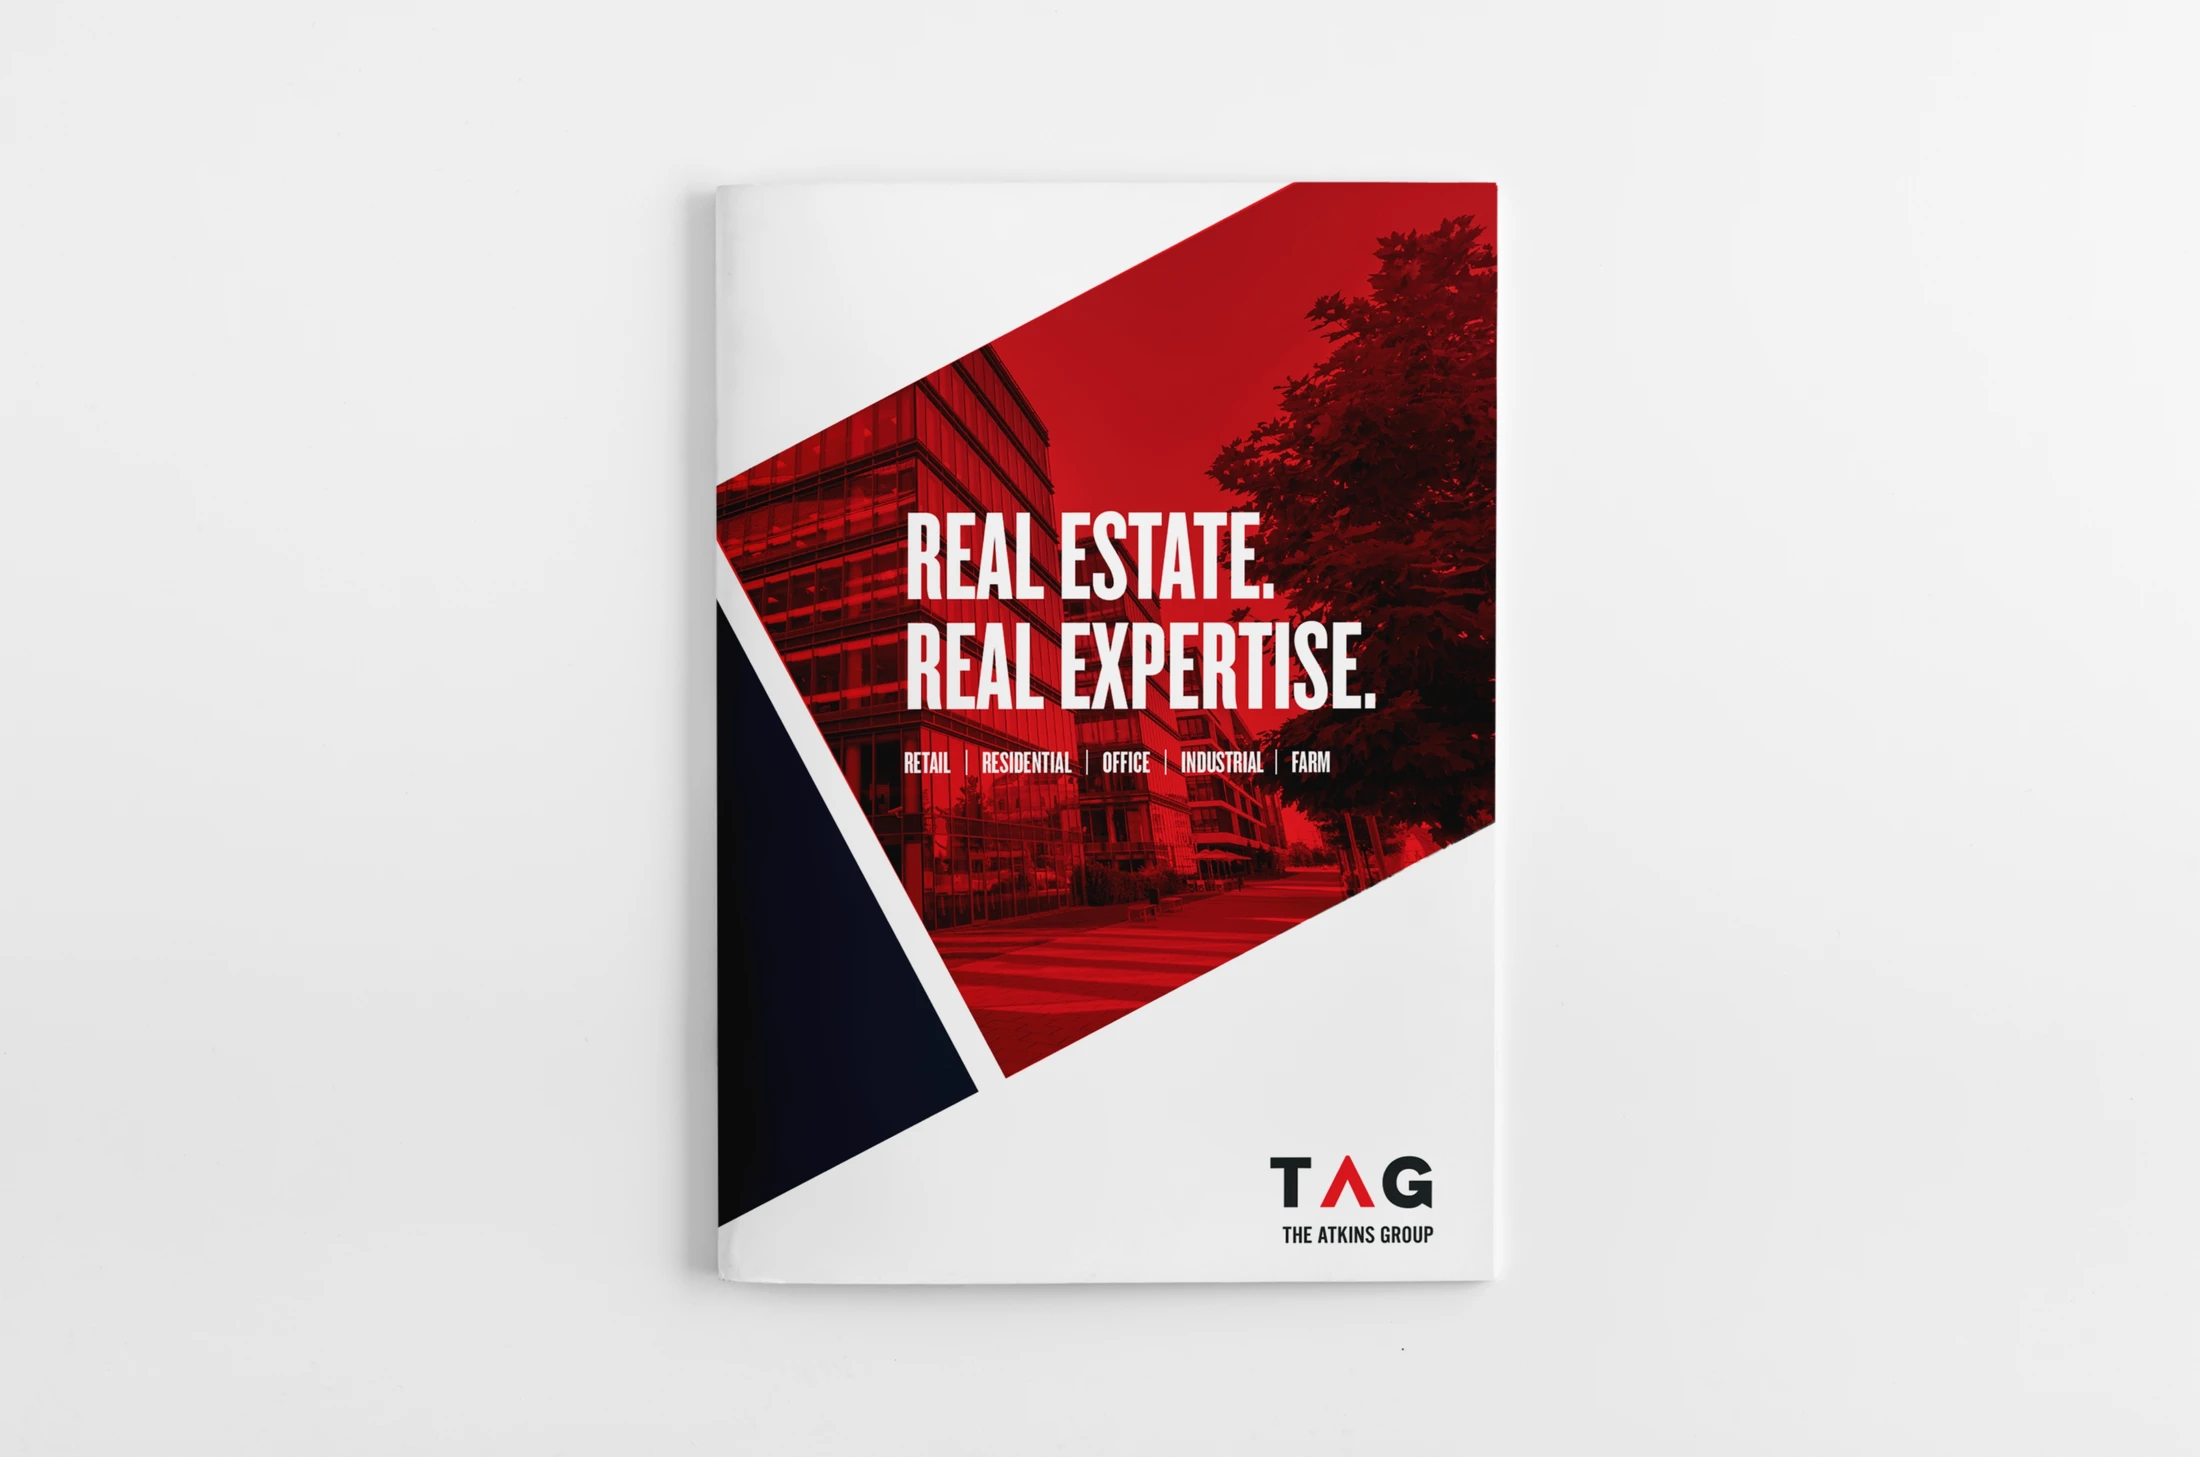 A real estate brochure with a red and black design.